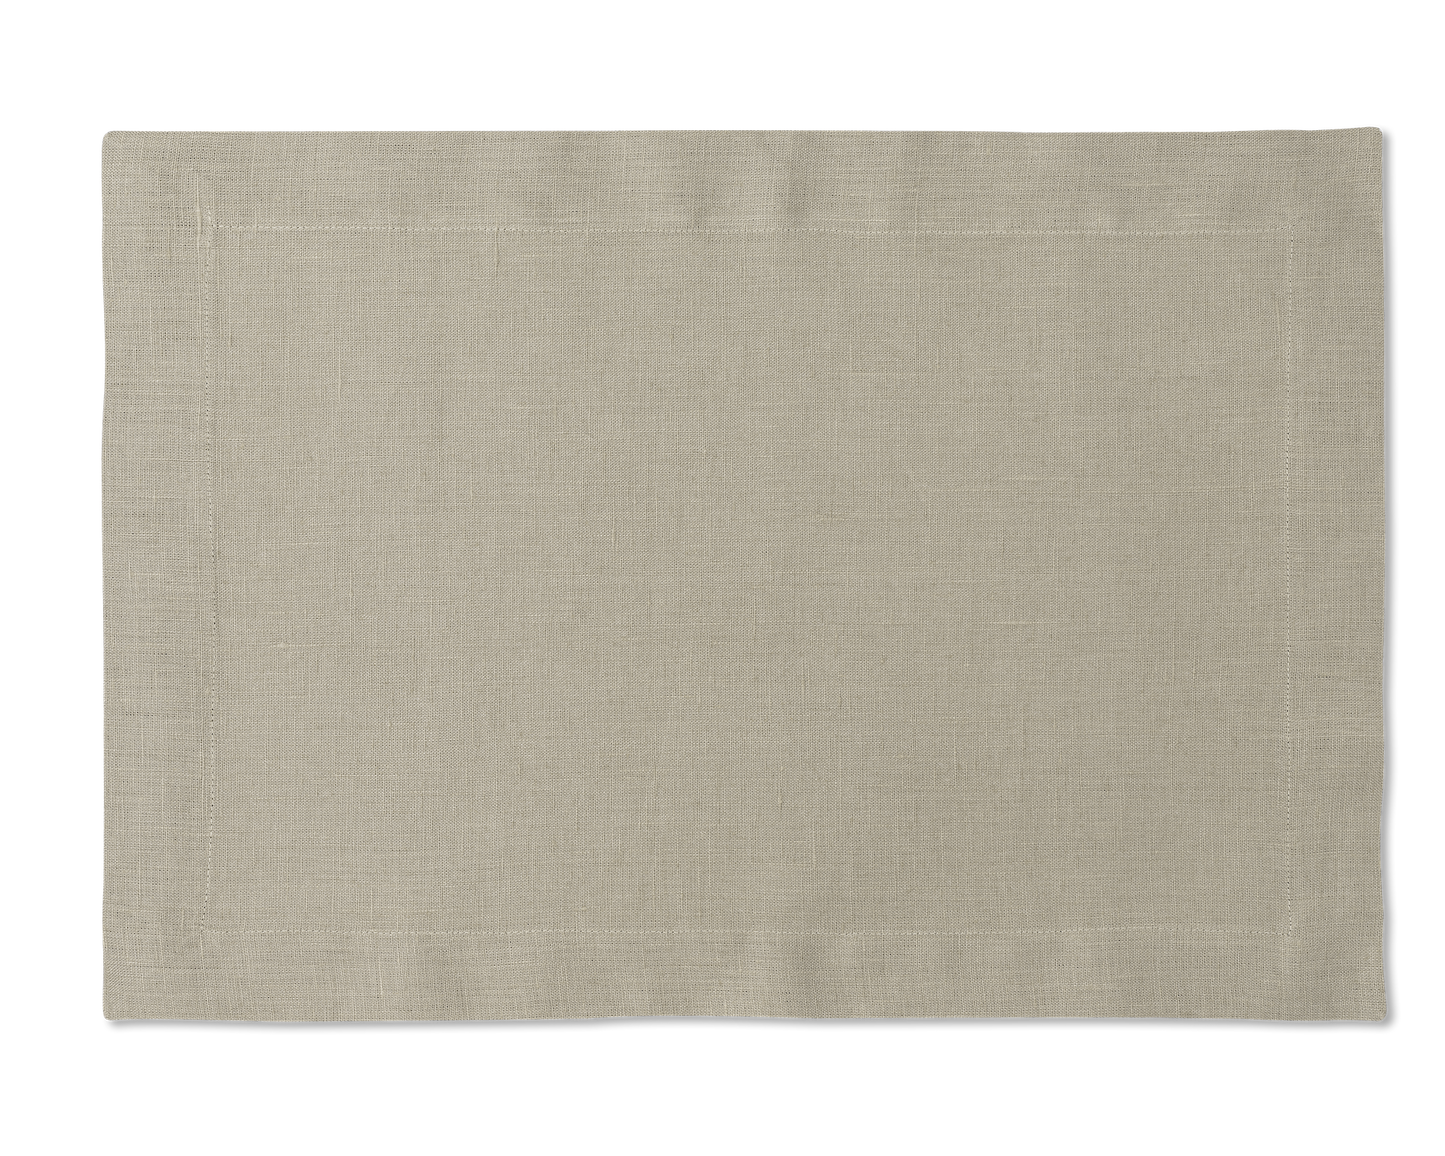 A linen placemat in the color sand